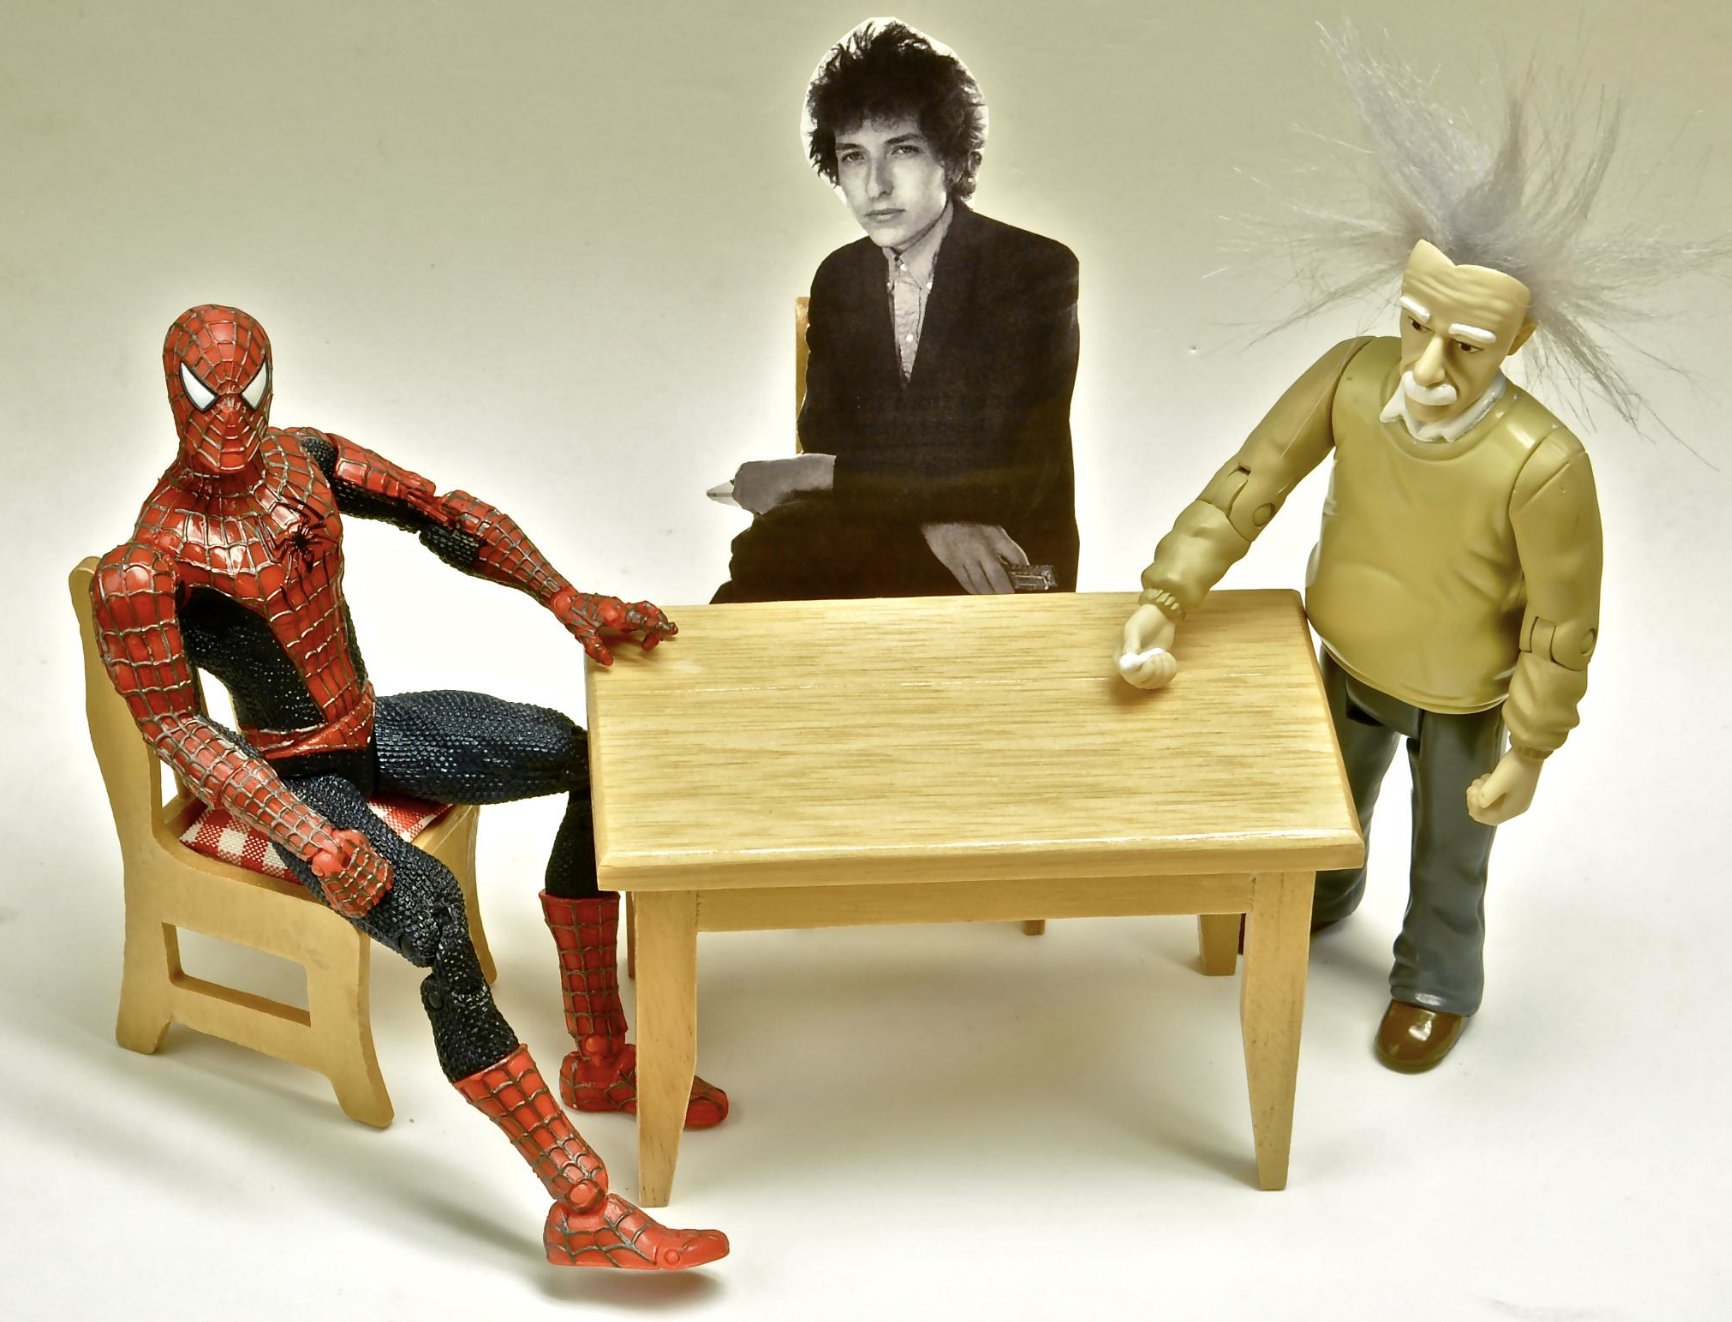 Happy 81st Birthday, Bob Dylan! Glad you could relax with some friends. [Photo by: Rick Hebenstreit] 